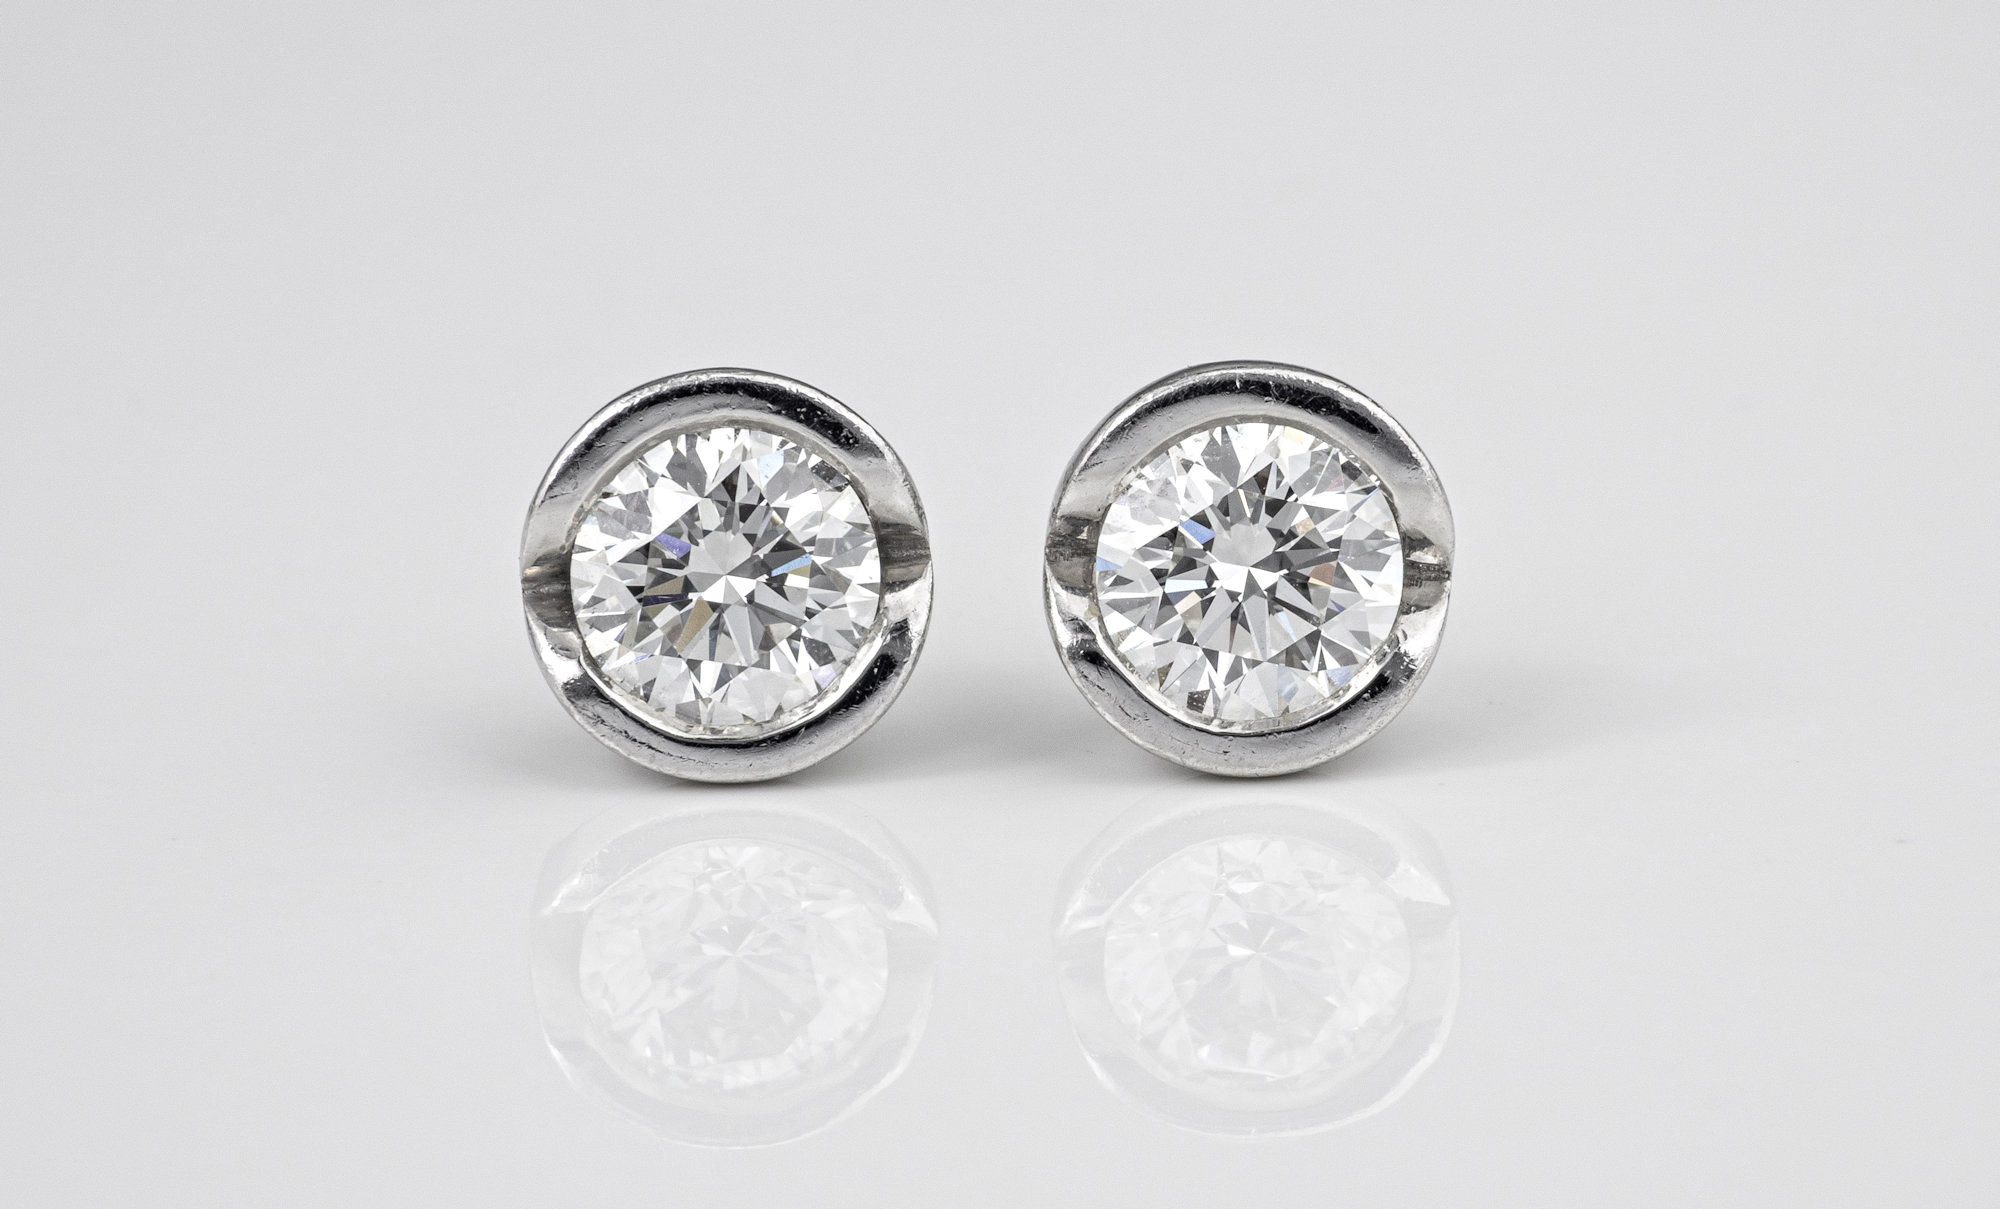 A fine pair of 18ct white gold and diamond solitaire stud earrings by Andrew Geoghegan the brilliant